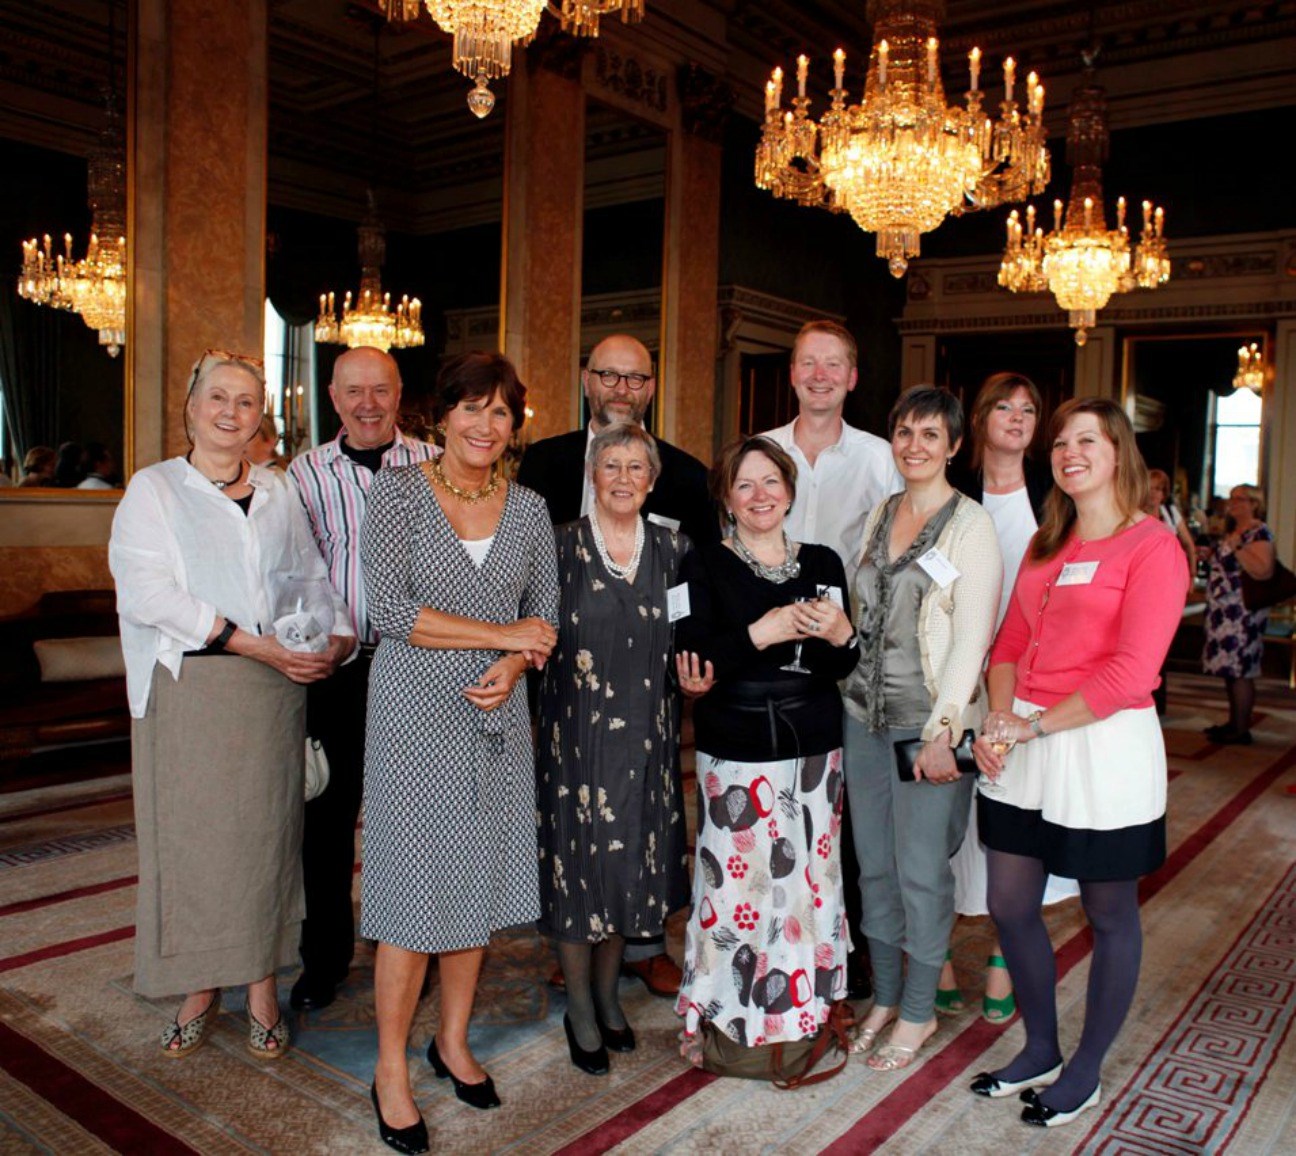 The winners: back row from left to right: Caroline Weir, Robin Weir, Tim Hayward, Mark Diacono and Niki Segnit; front row from left to right: Josceline Dimbleby, Anna del Conte, Sheila Dillon, Sybil Kapoor and Felicity Cloake